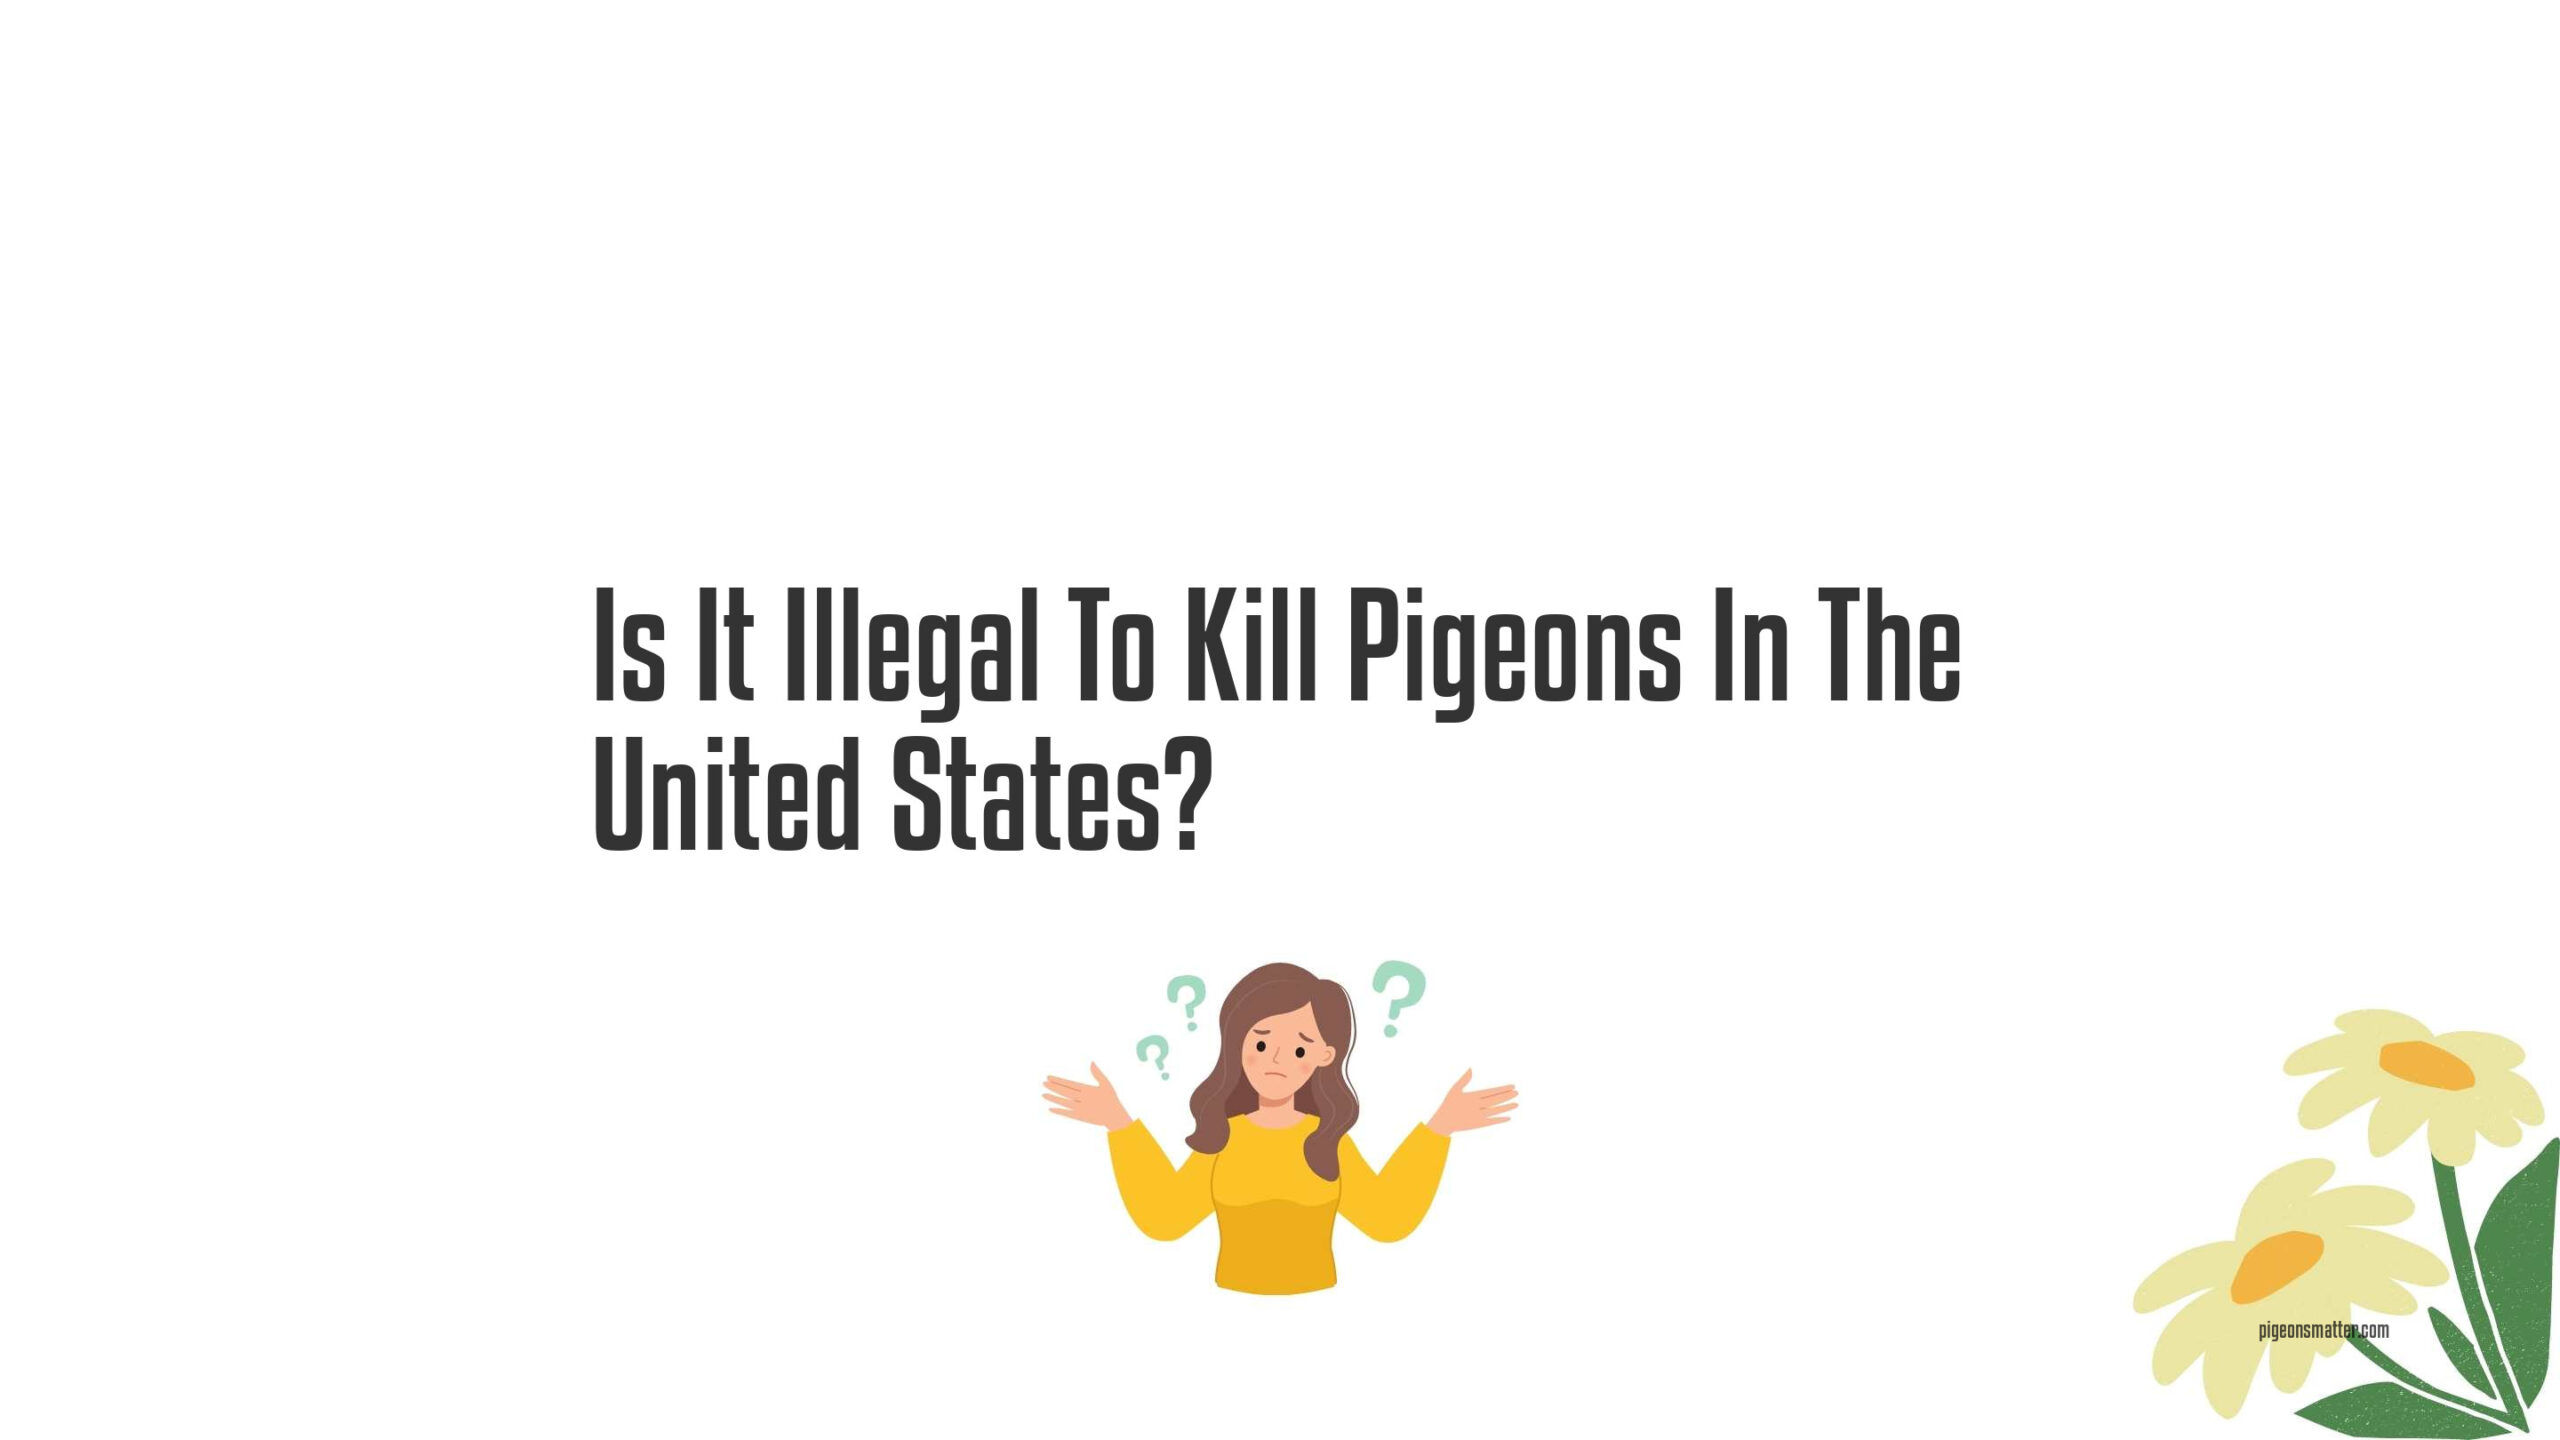 Is It Illegal To Kill Pigeons In The United States?